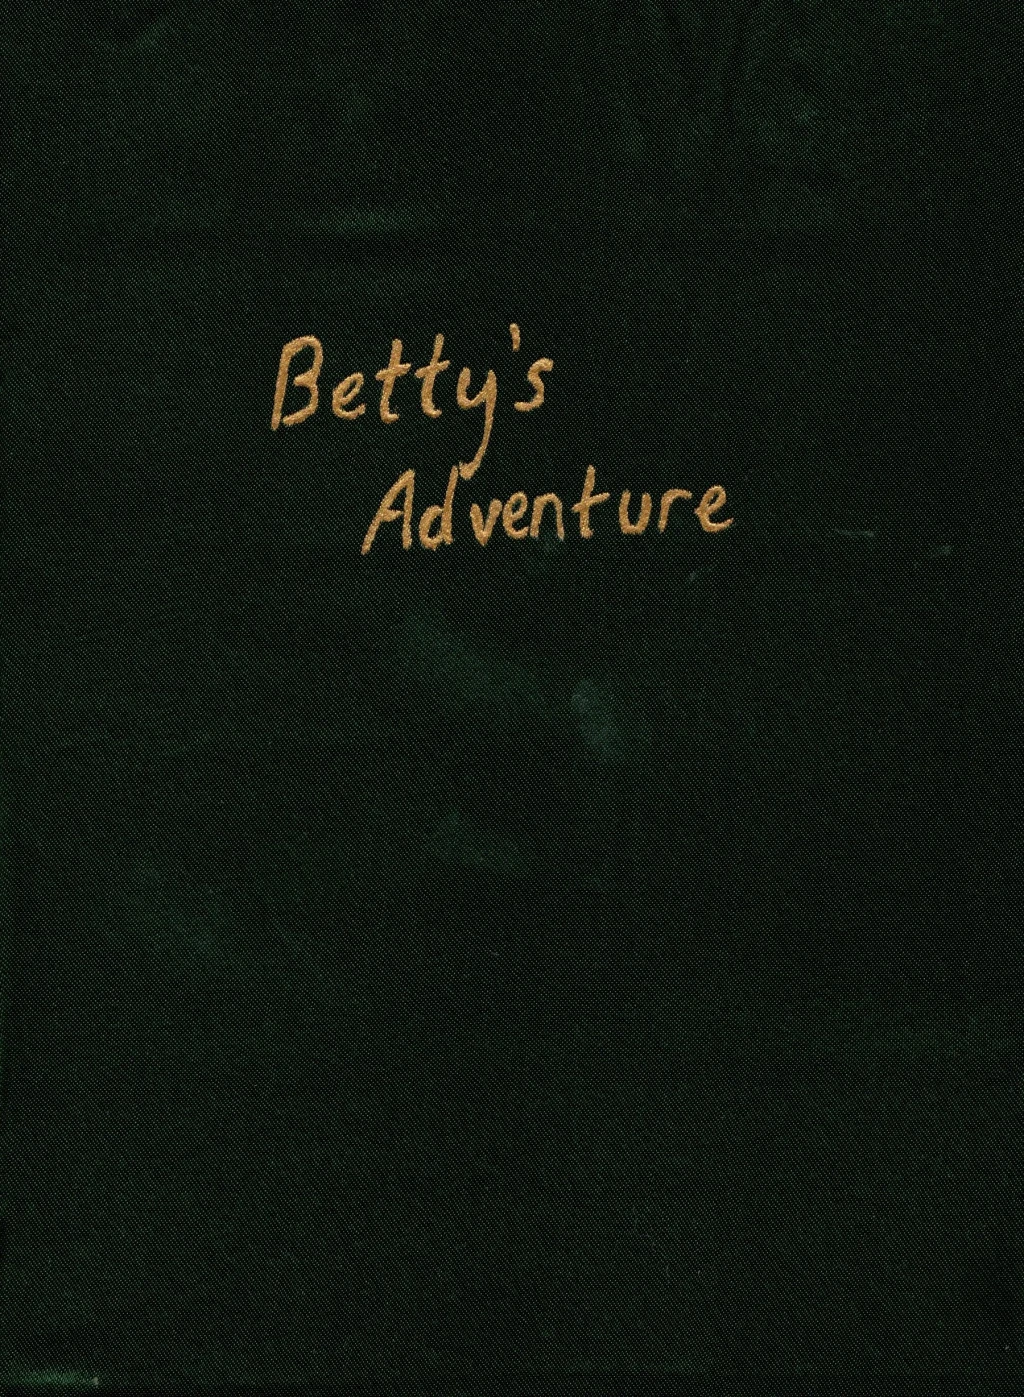 Draft manuscript of “Betty’s Adventure” discovered